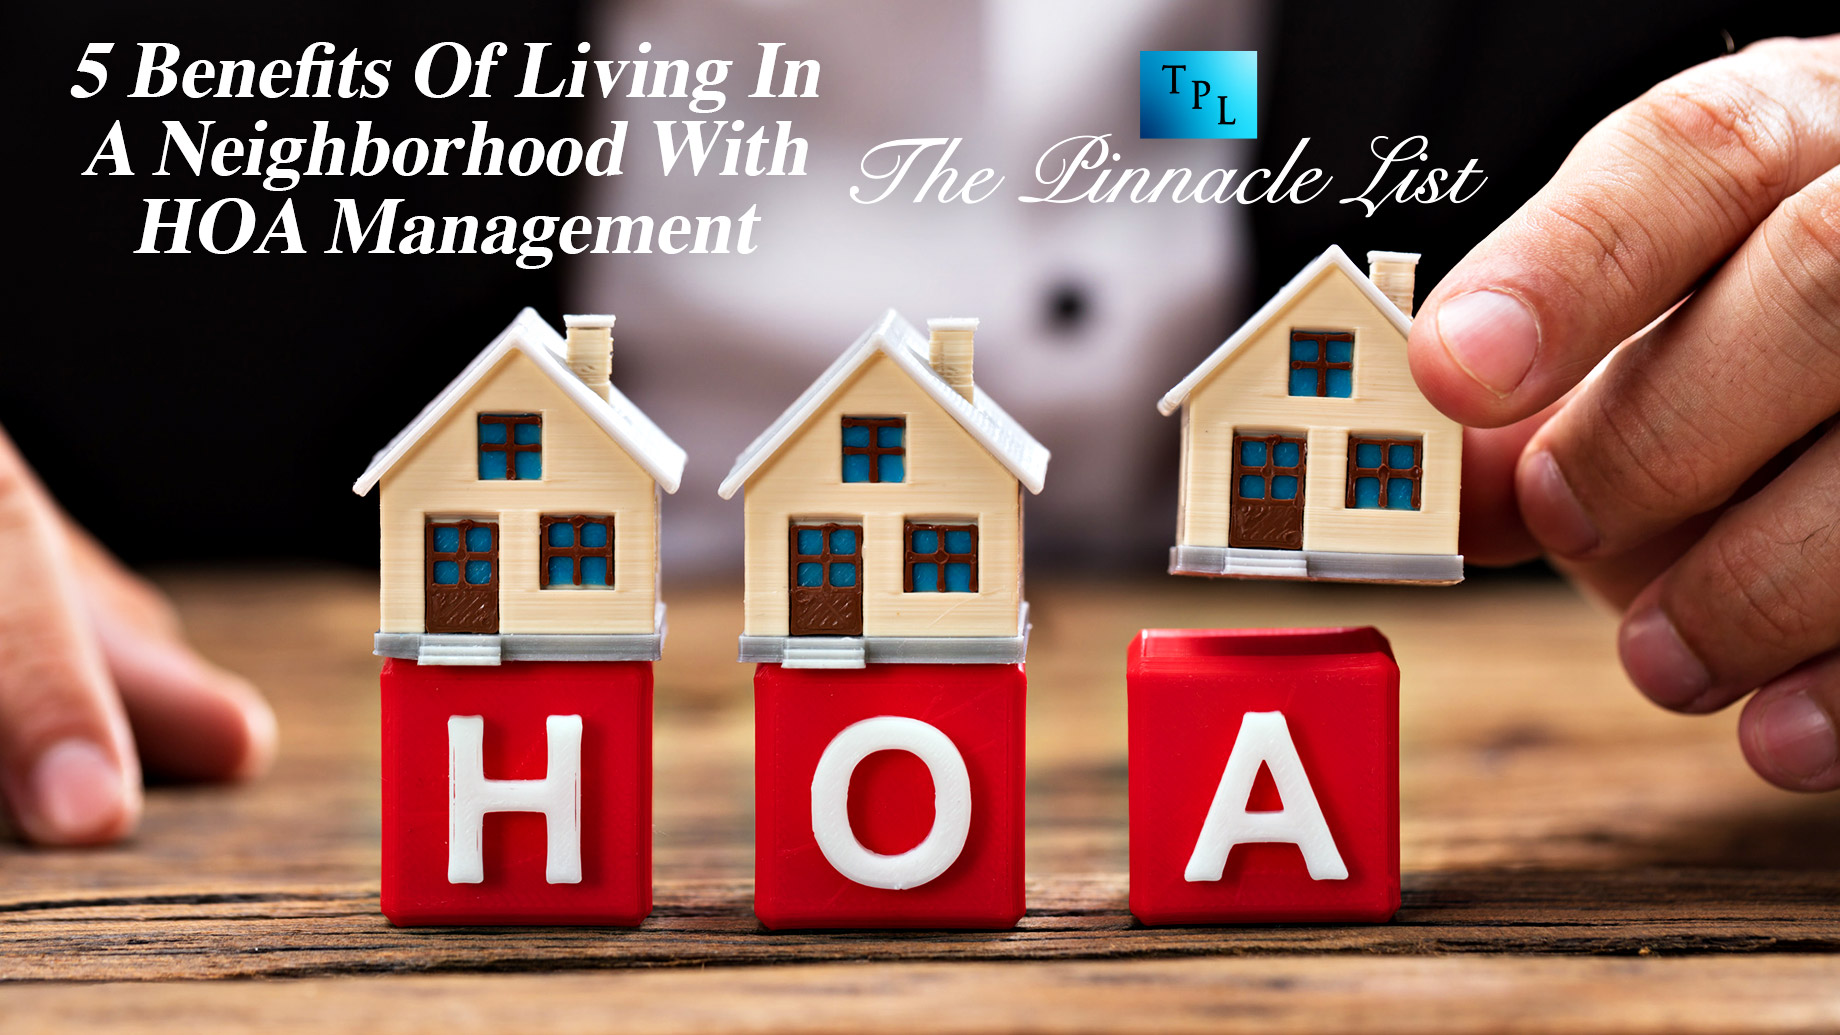 5 Benefits Of Living In A Neighborhood With HOA Management